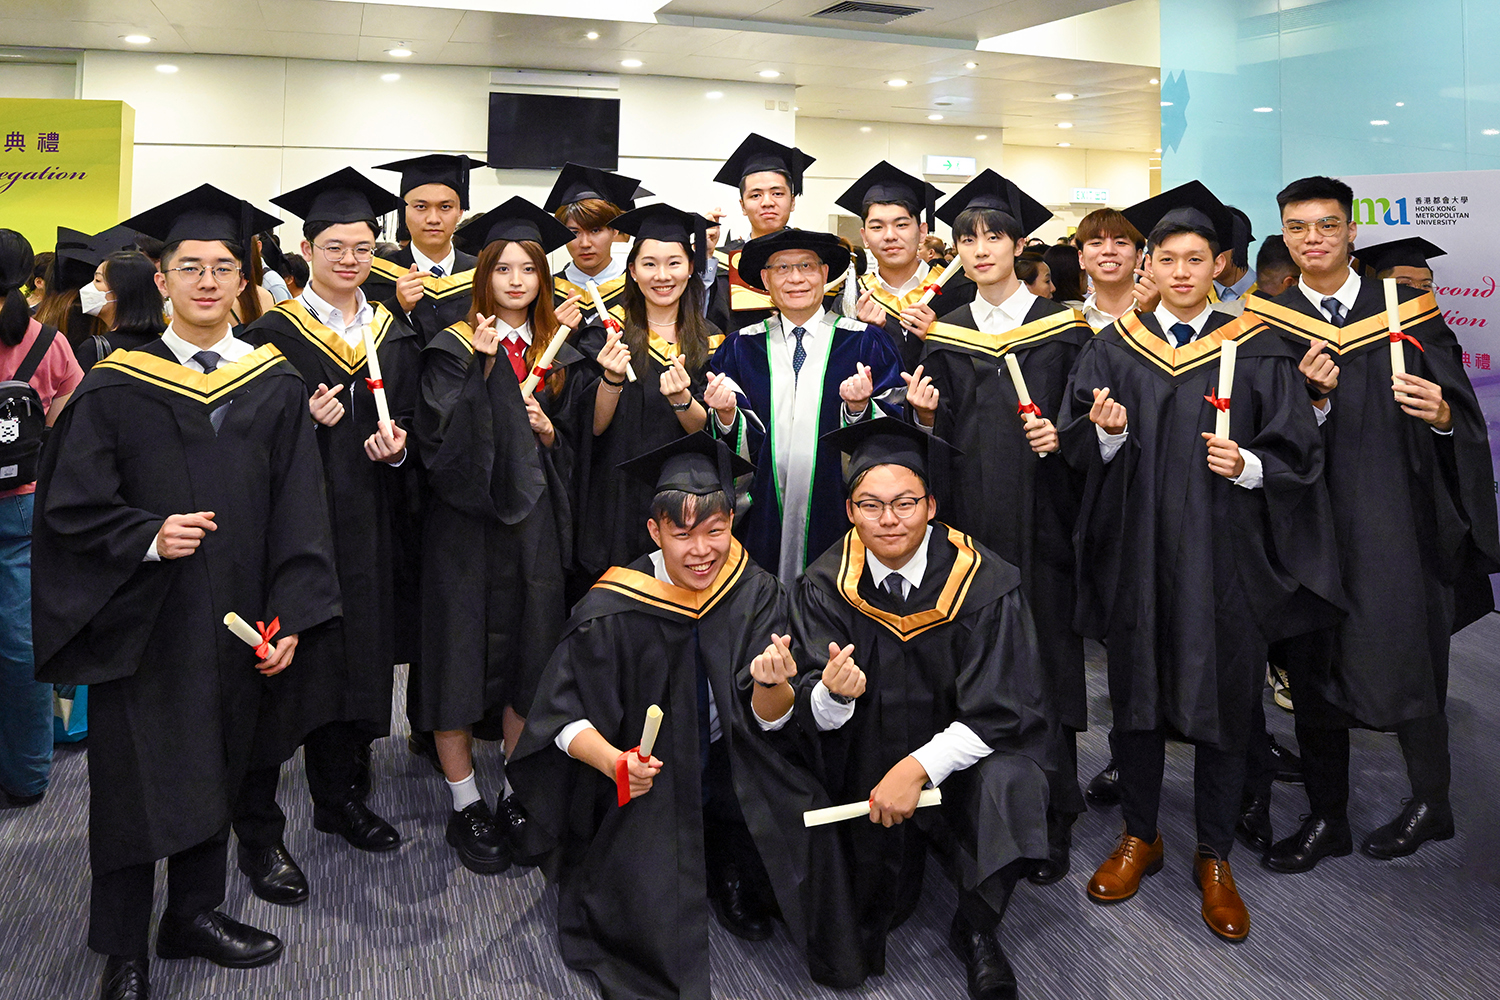 HKMU President Prof. Lam Kwan-sing congratulates the graduates for successfully completing their studies and bonds with them.